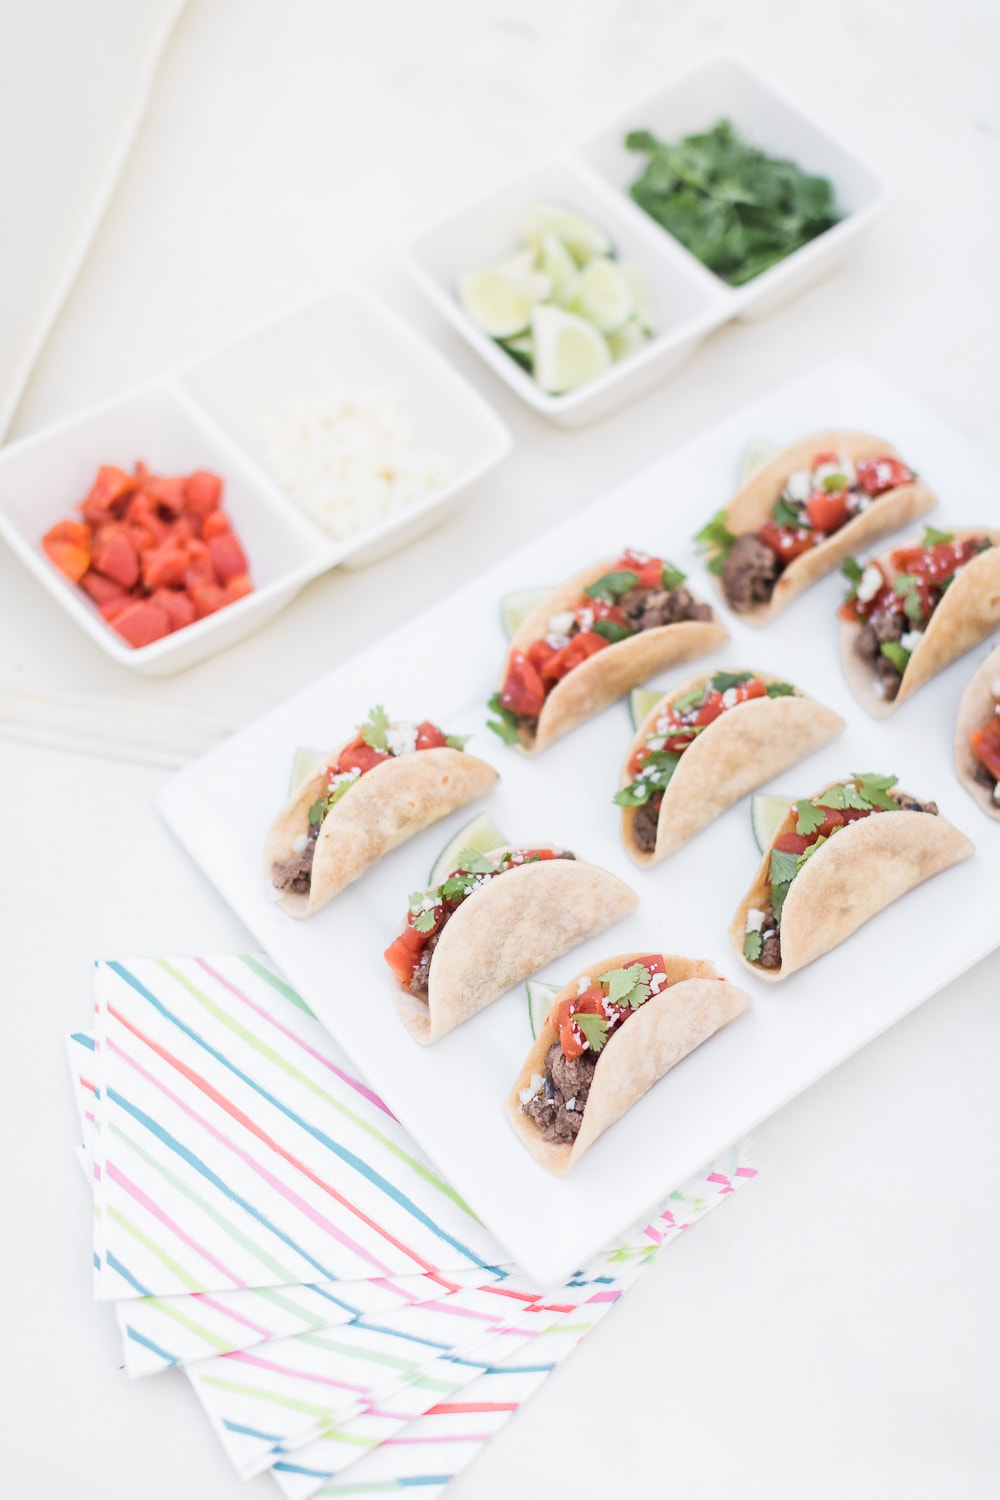 Blogger Stephanie Ziajka shares her go-to easy mini tacos recipe for National Beef Month on Diary of a Debutante